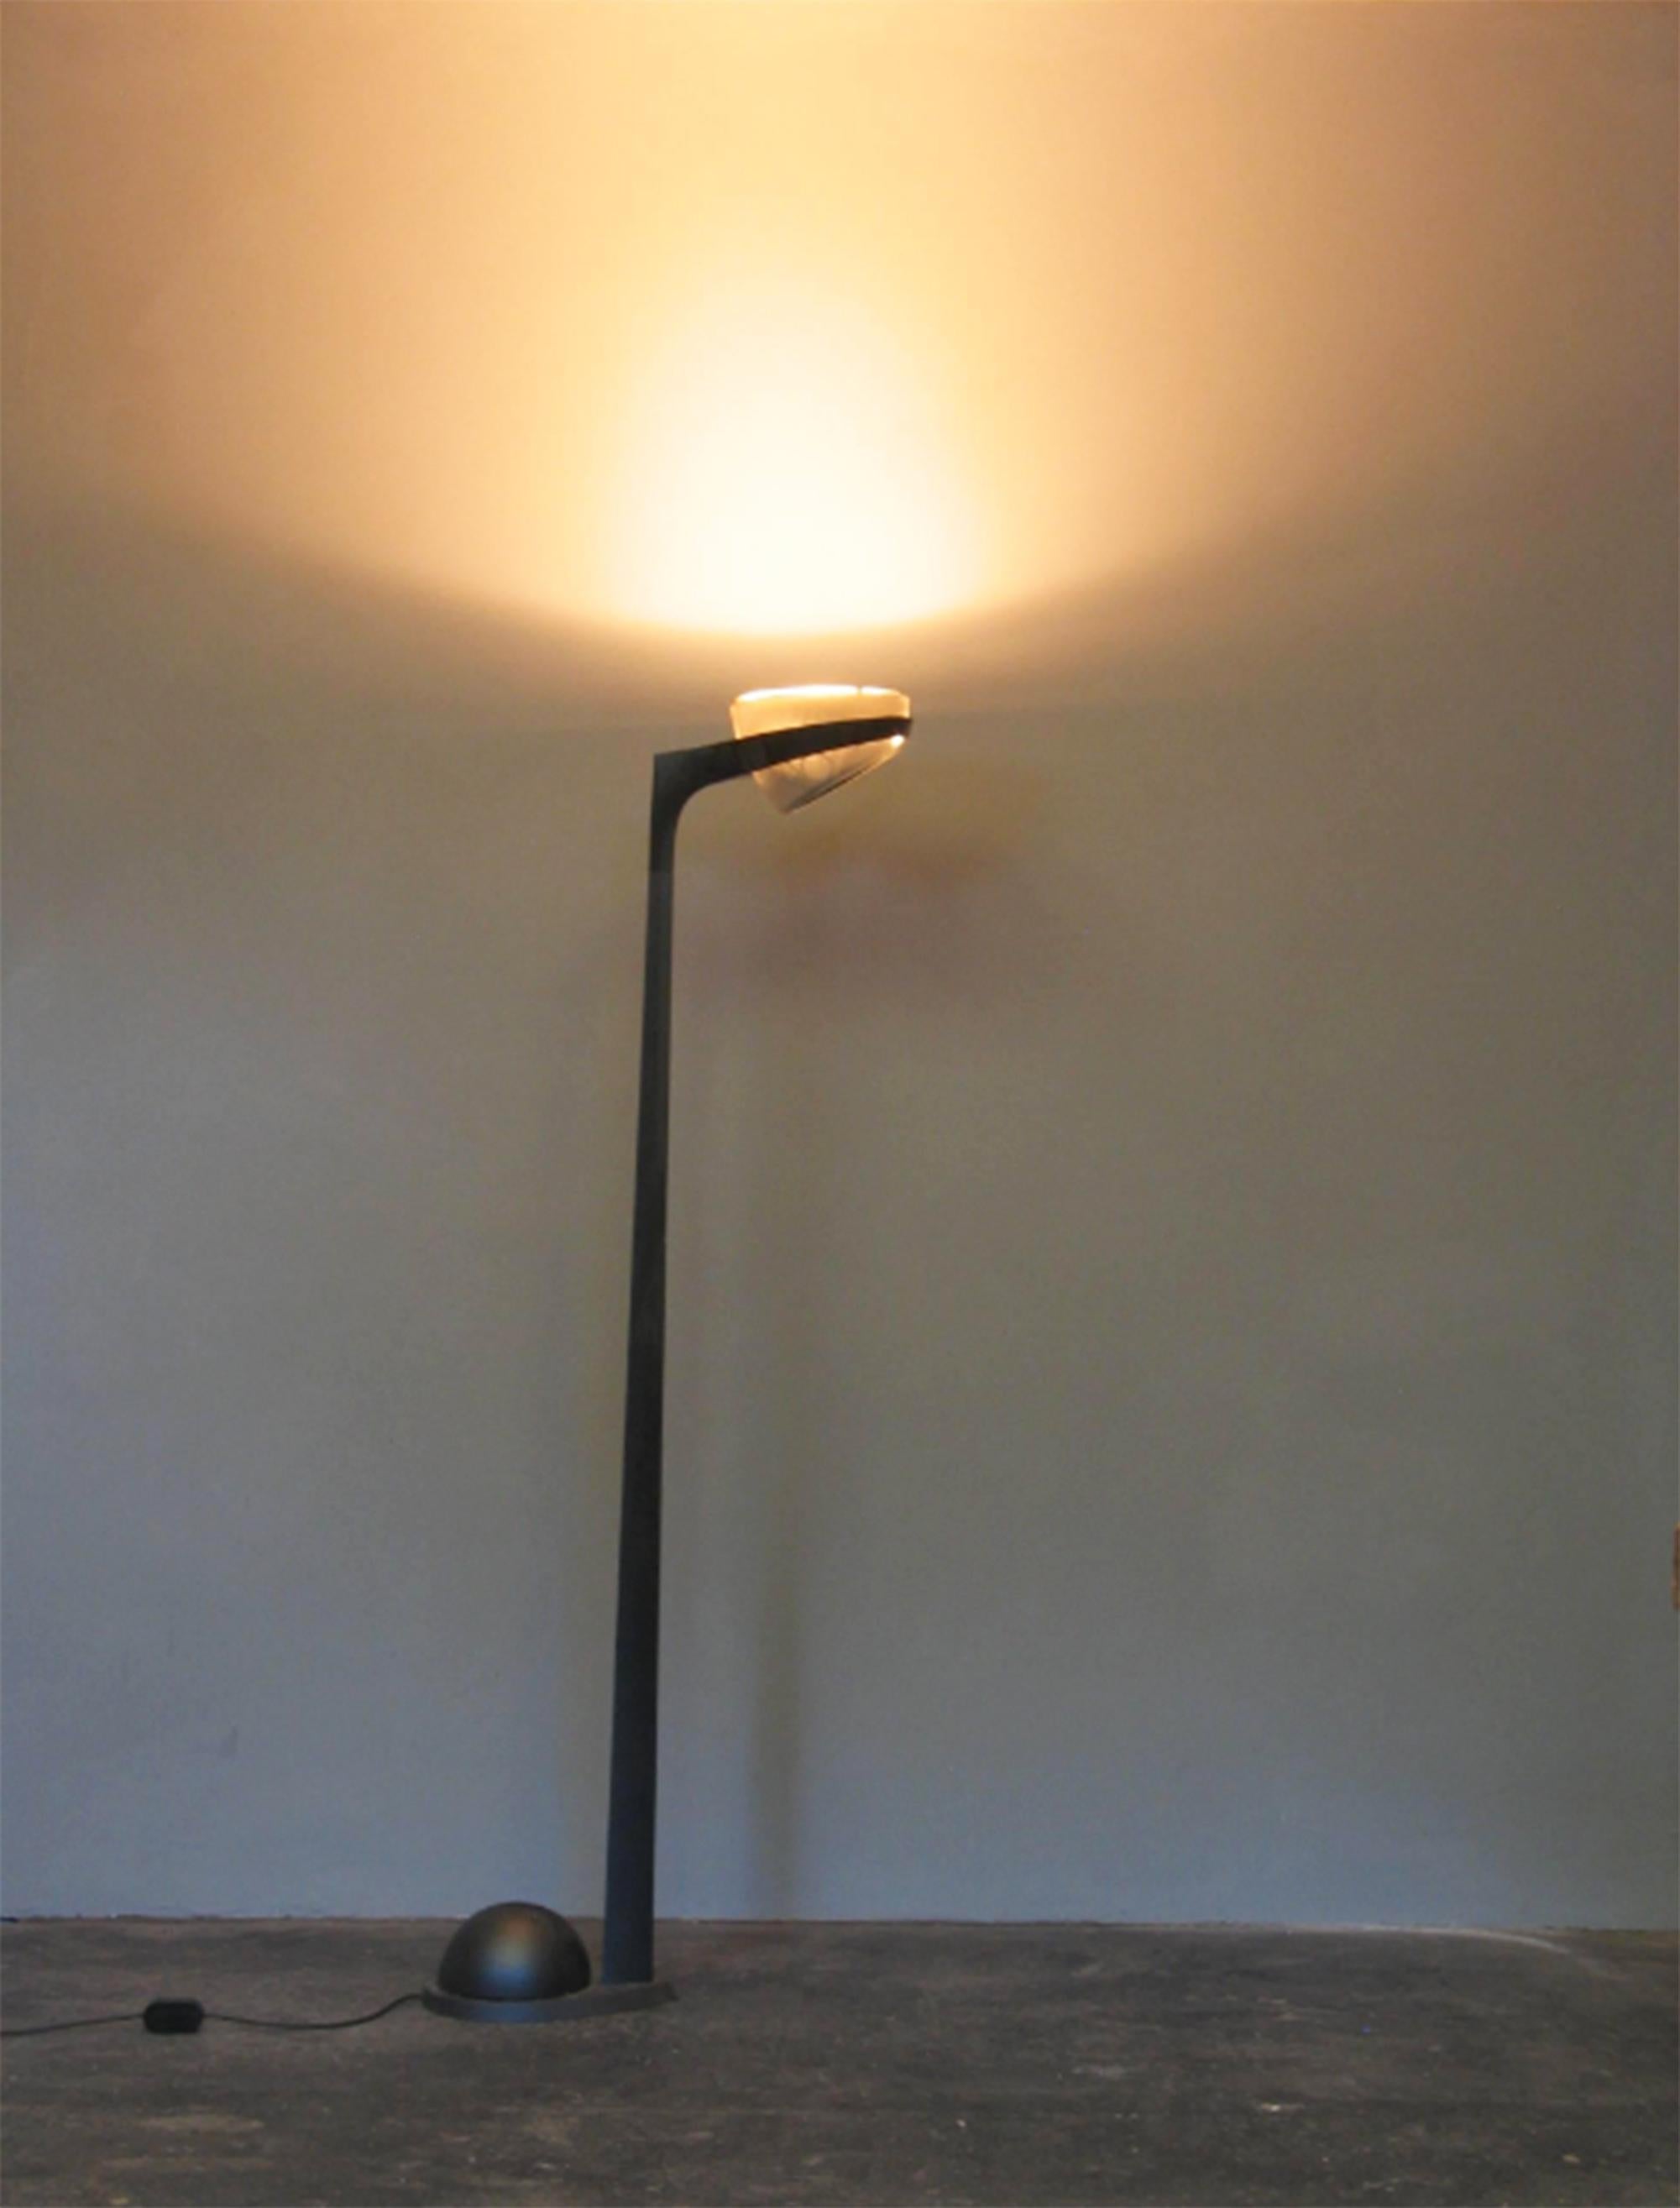 Extremely rare 'Sistema Grall' floor lamp manufactured by Arteluce, designed by Ferrari, Luciano Pagani, and Angelo Perversi in charcoal grey metal (base textured, pole and headstand in glossy coated finish) and glass.

Awarded with the Compasso